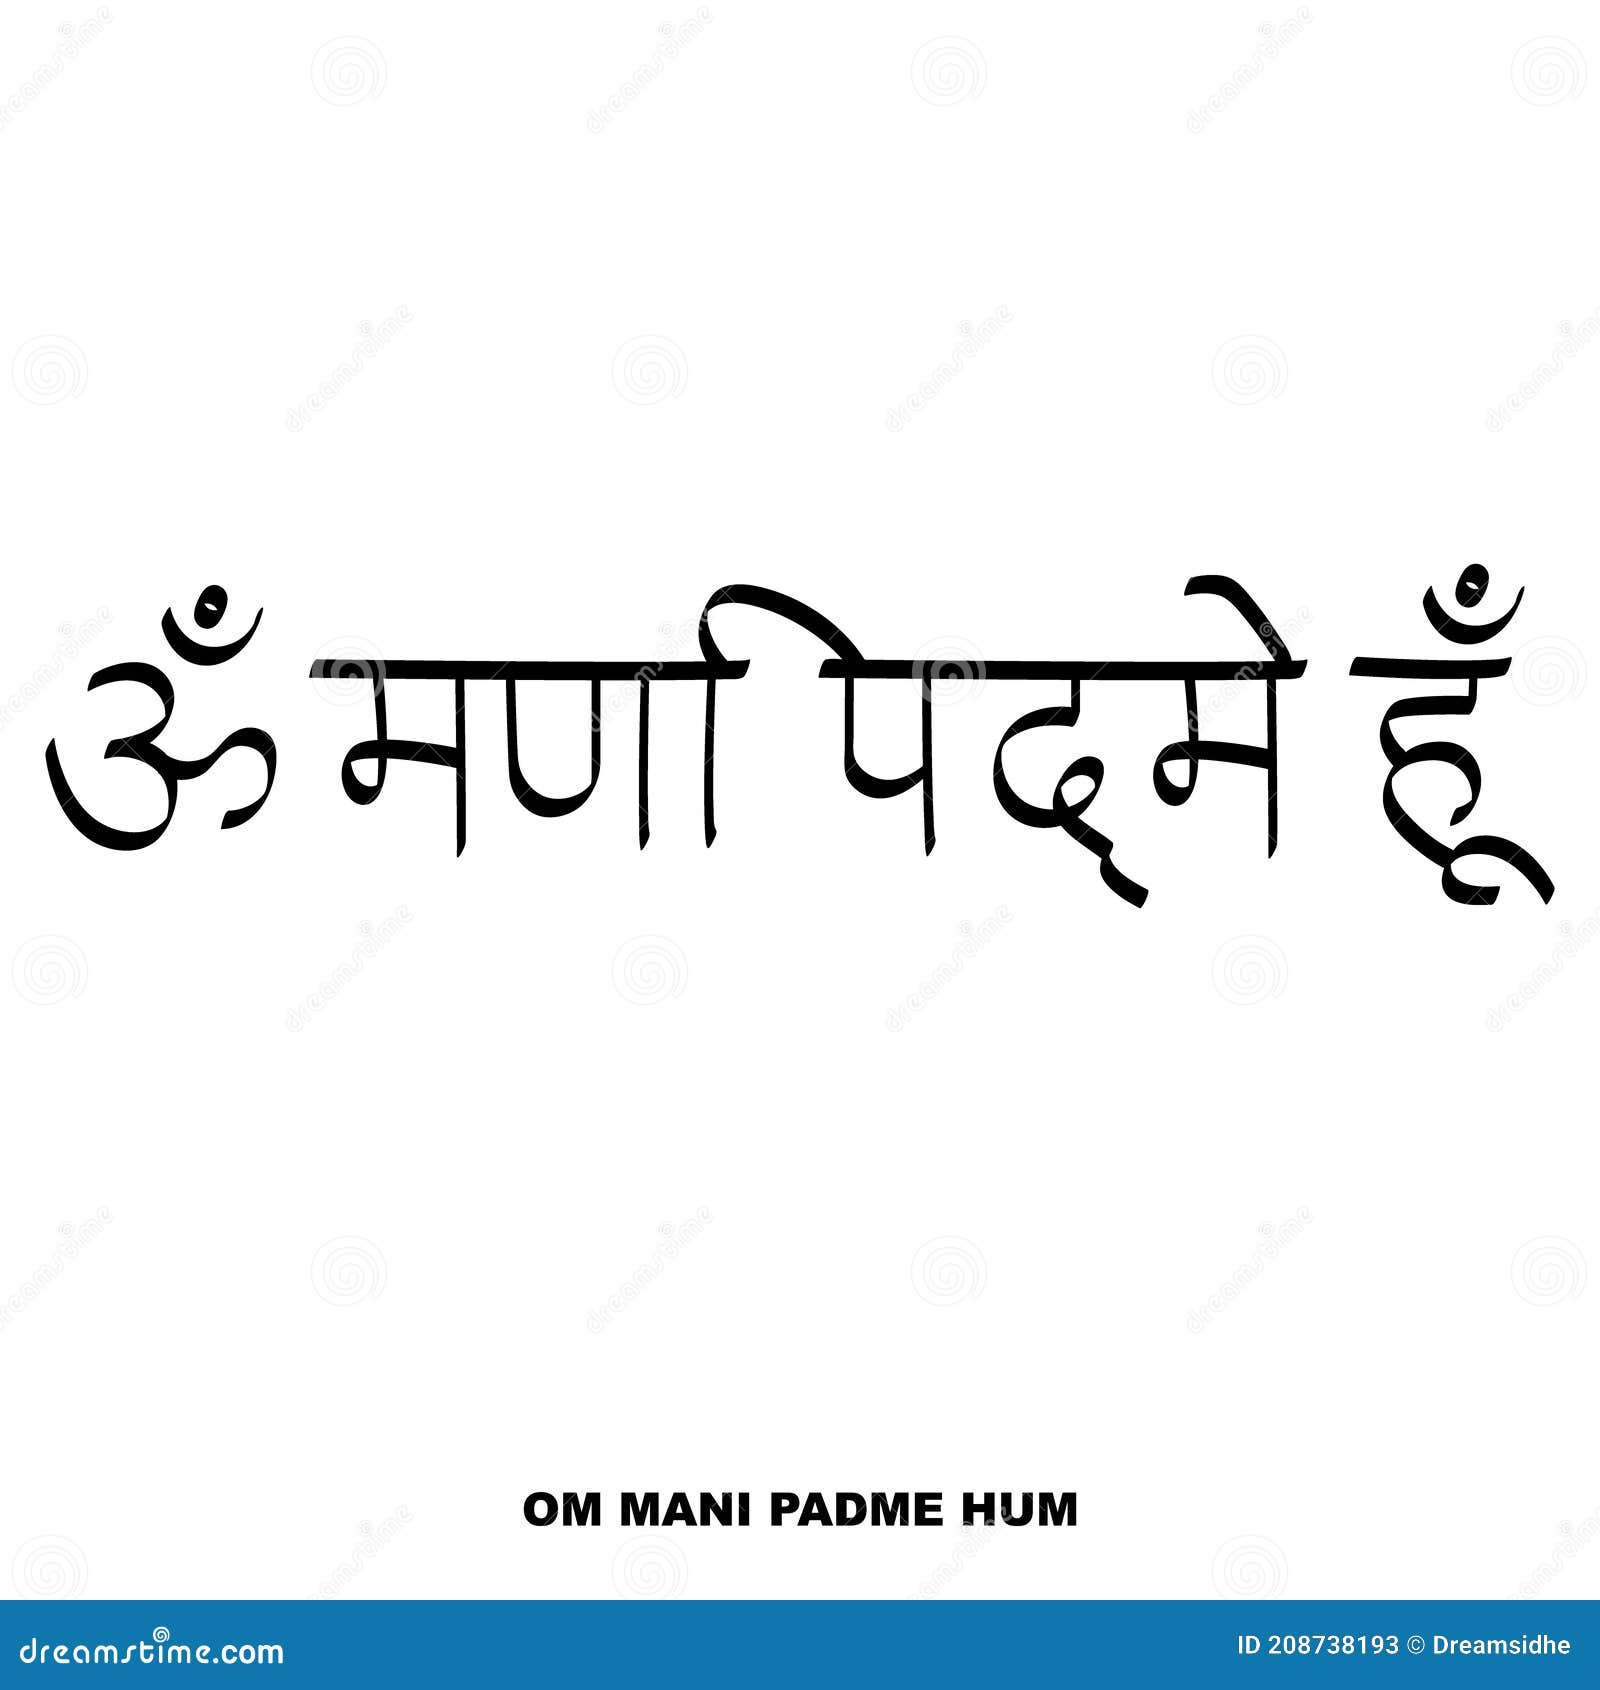 Details 101+ about om mani padme hum tattoo vertical latest -  .vn